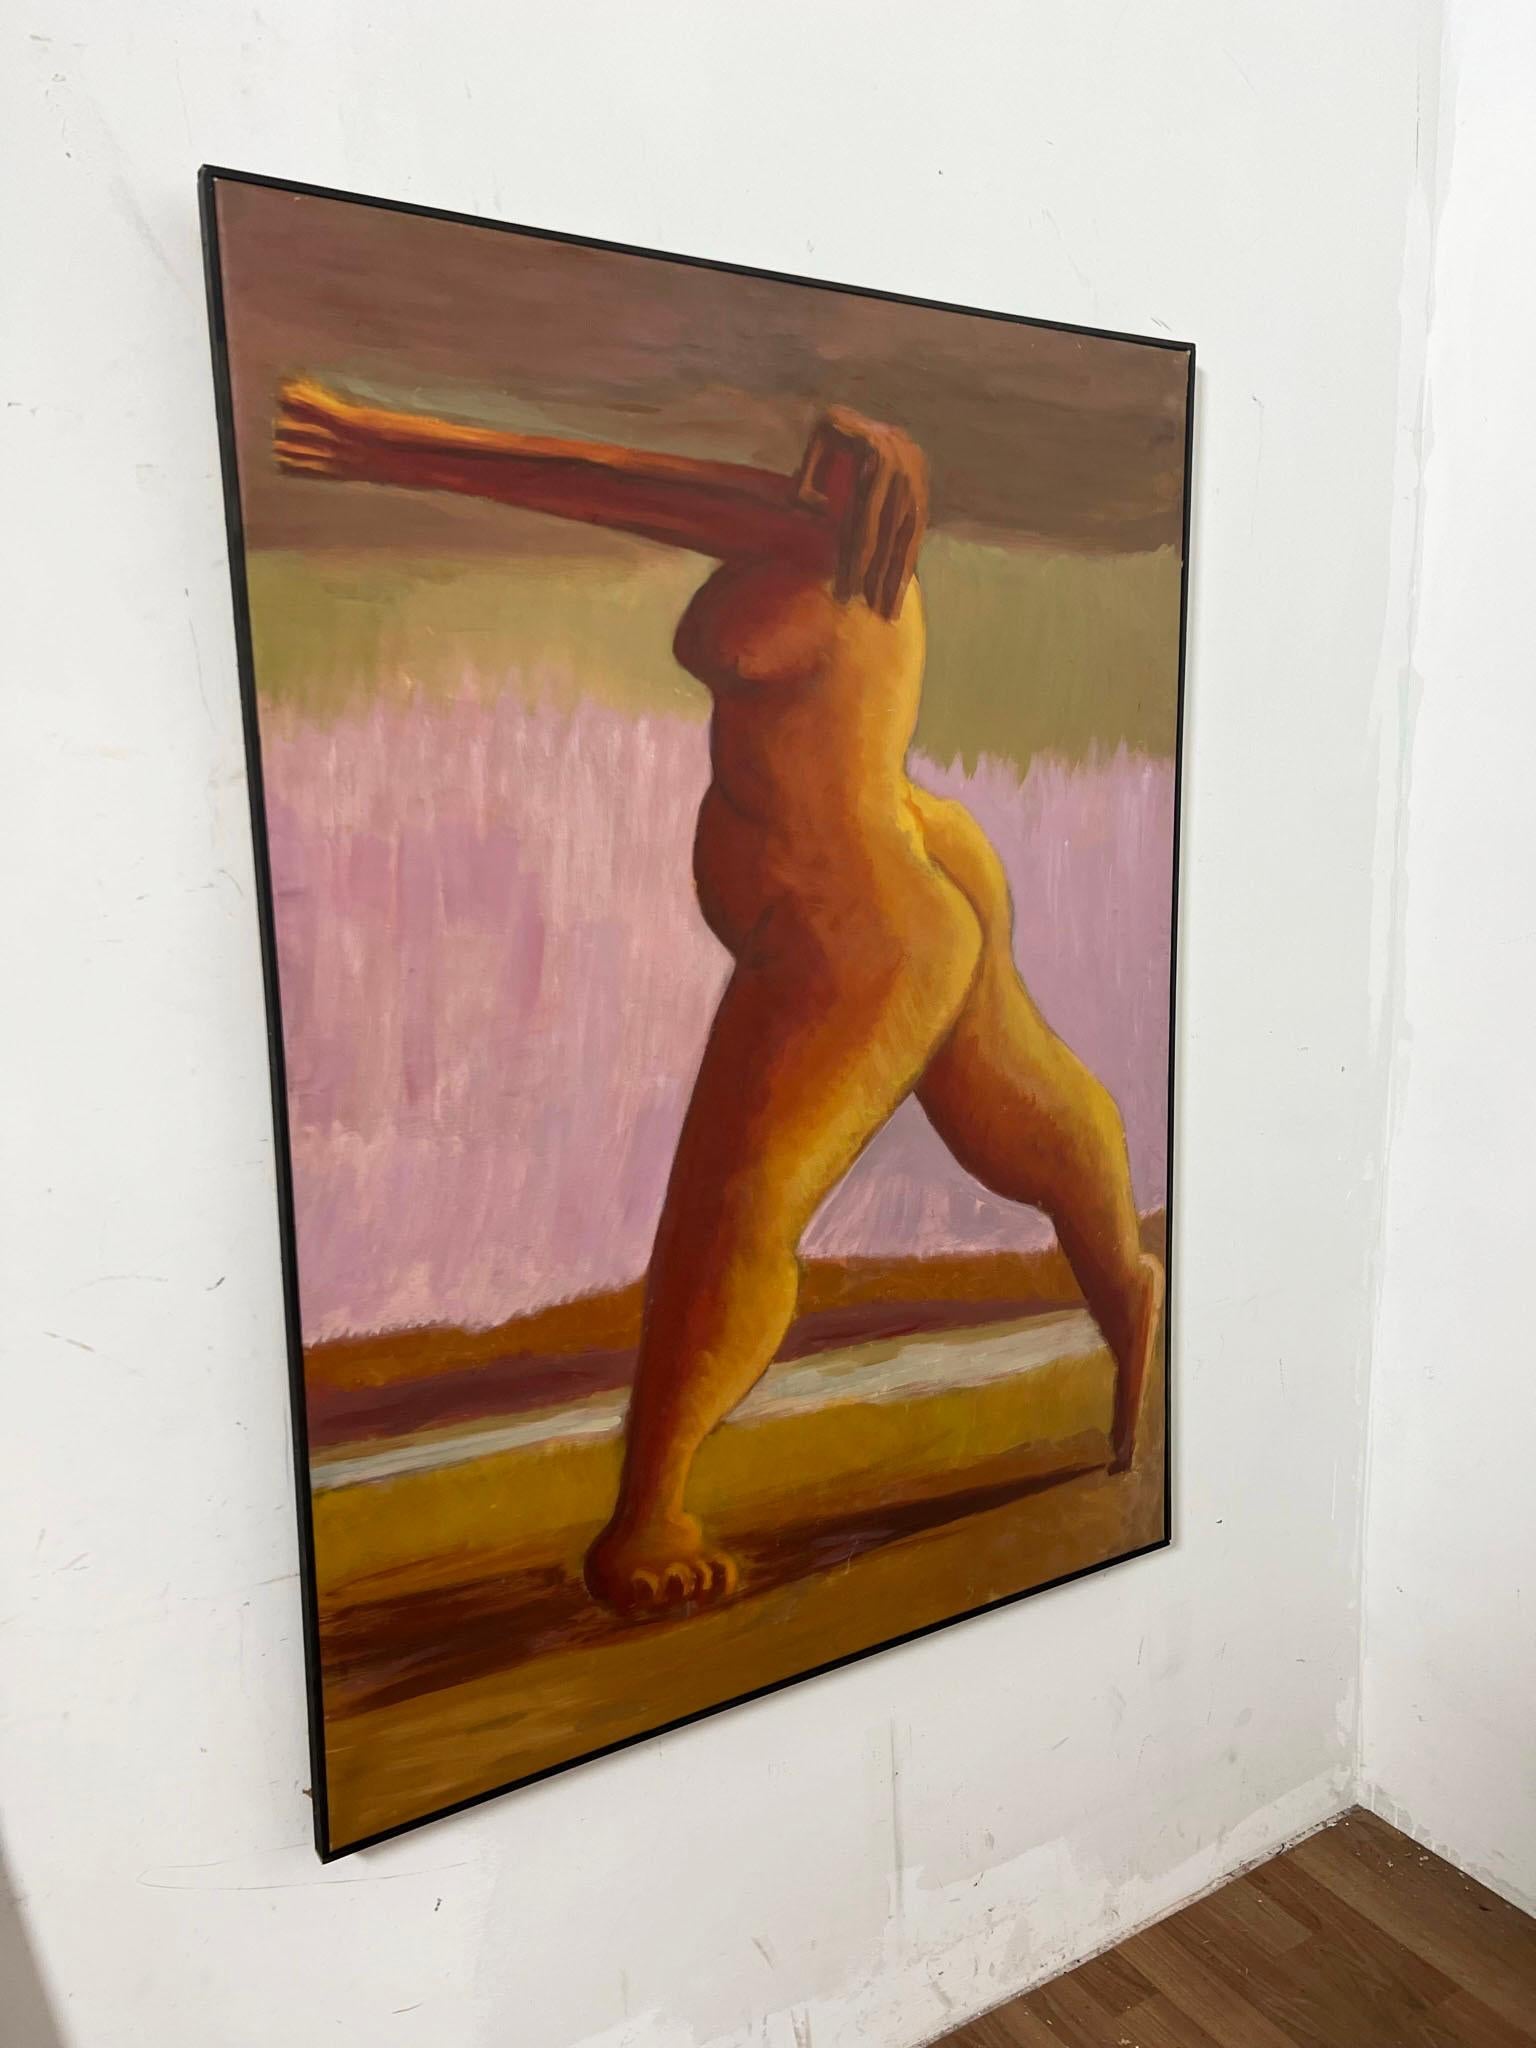 Mid-Century Modern Harold Mesibov Modernist Figurative Oil Painting, d. 1956 For Sale